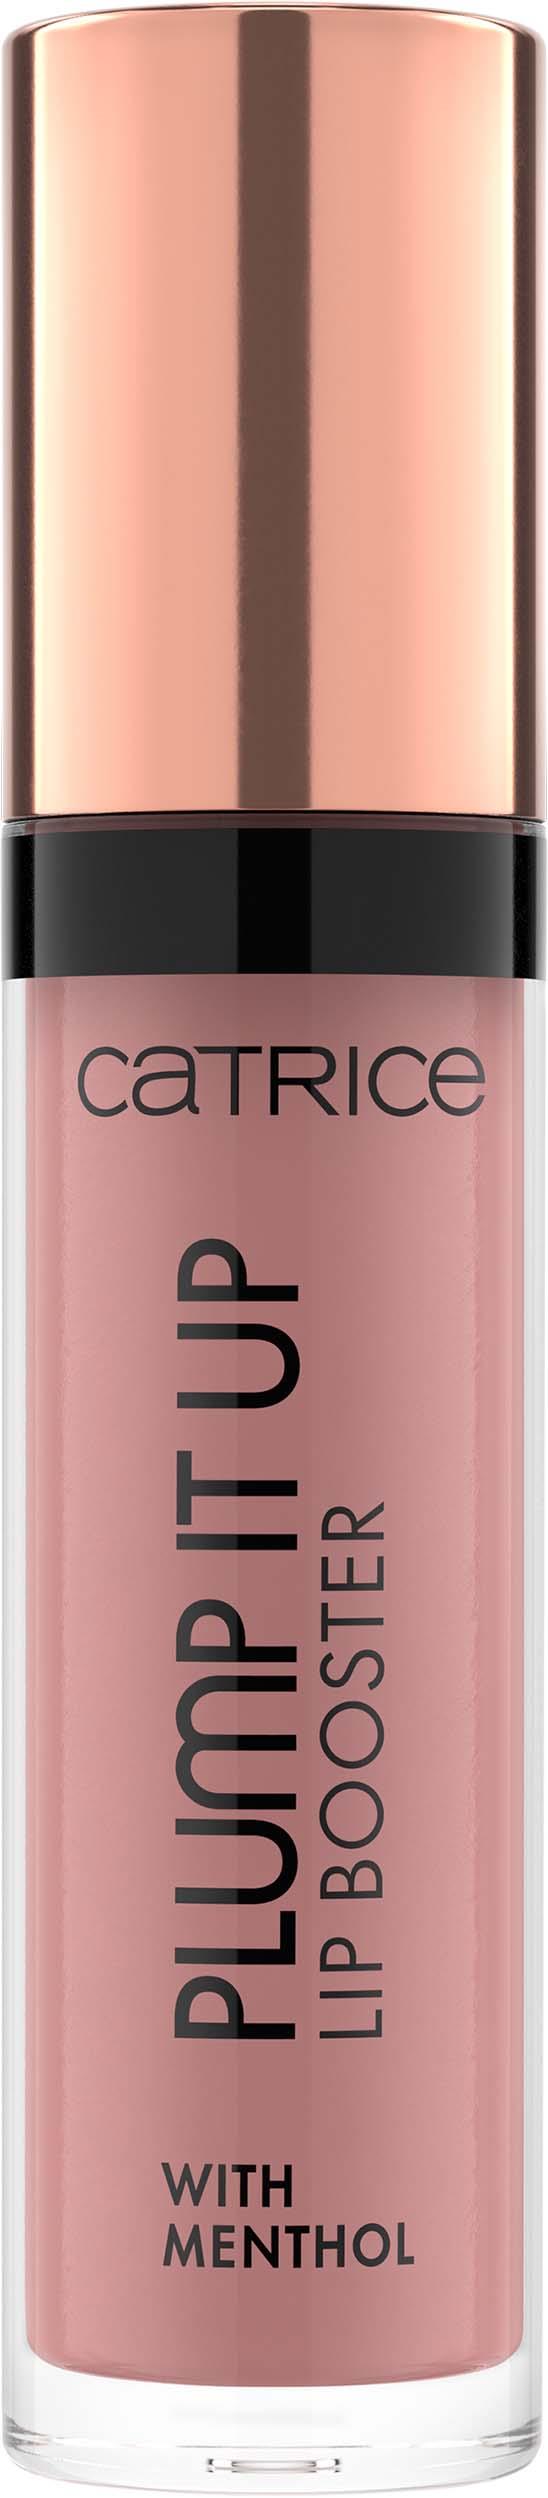 Plump Catrice It 040 Wrong Me Lip Up Prove Booster